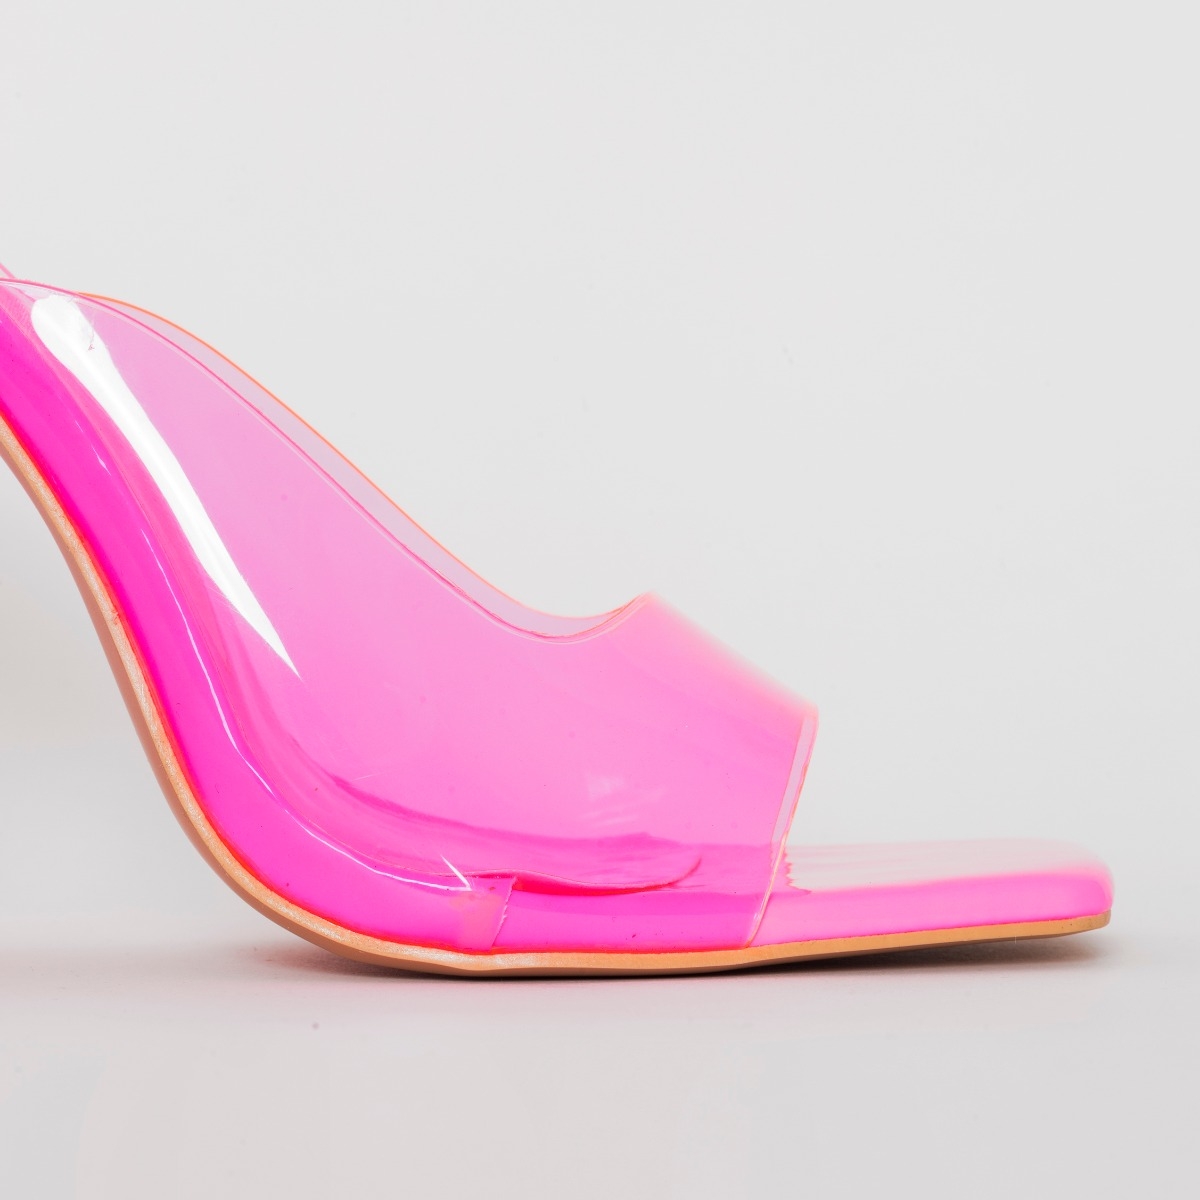 Clermont Twins Plastik Neon Pink Patent Clear Block Heel Mules